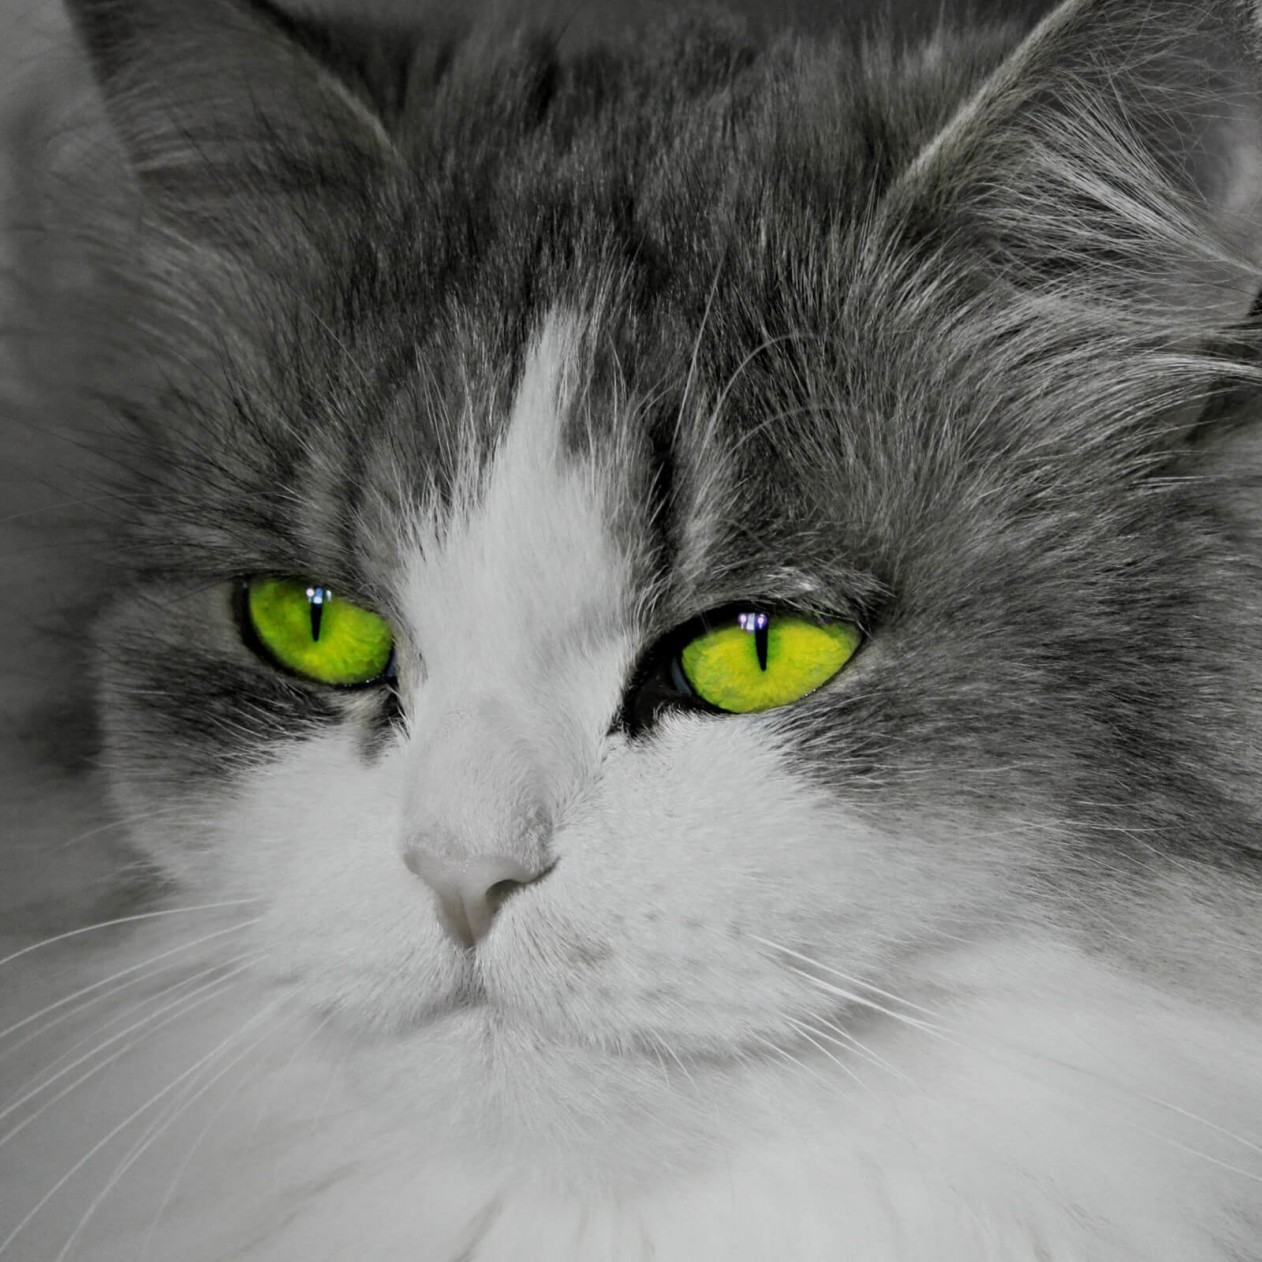 Cat With Stunningly Green Eyes Wallpaper for Apple iPad mini